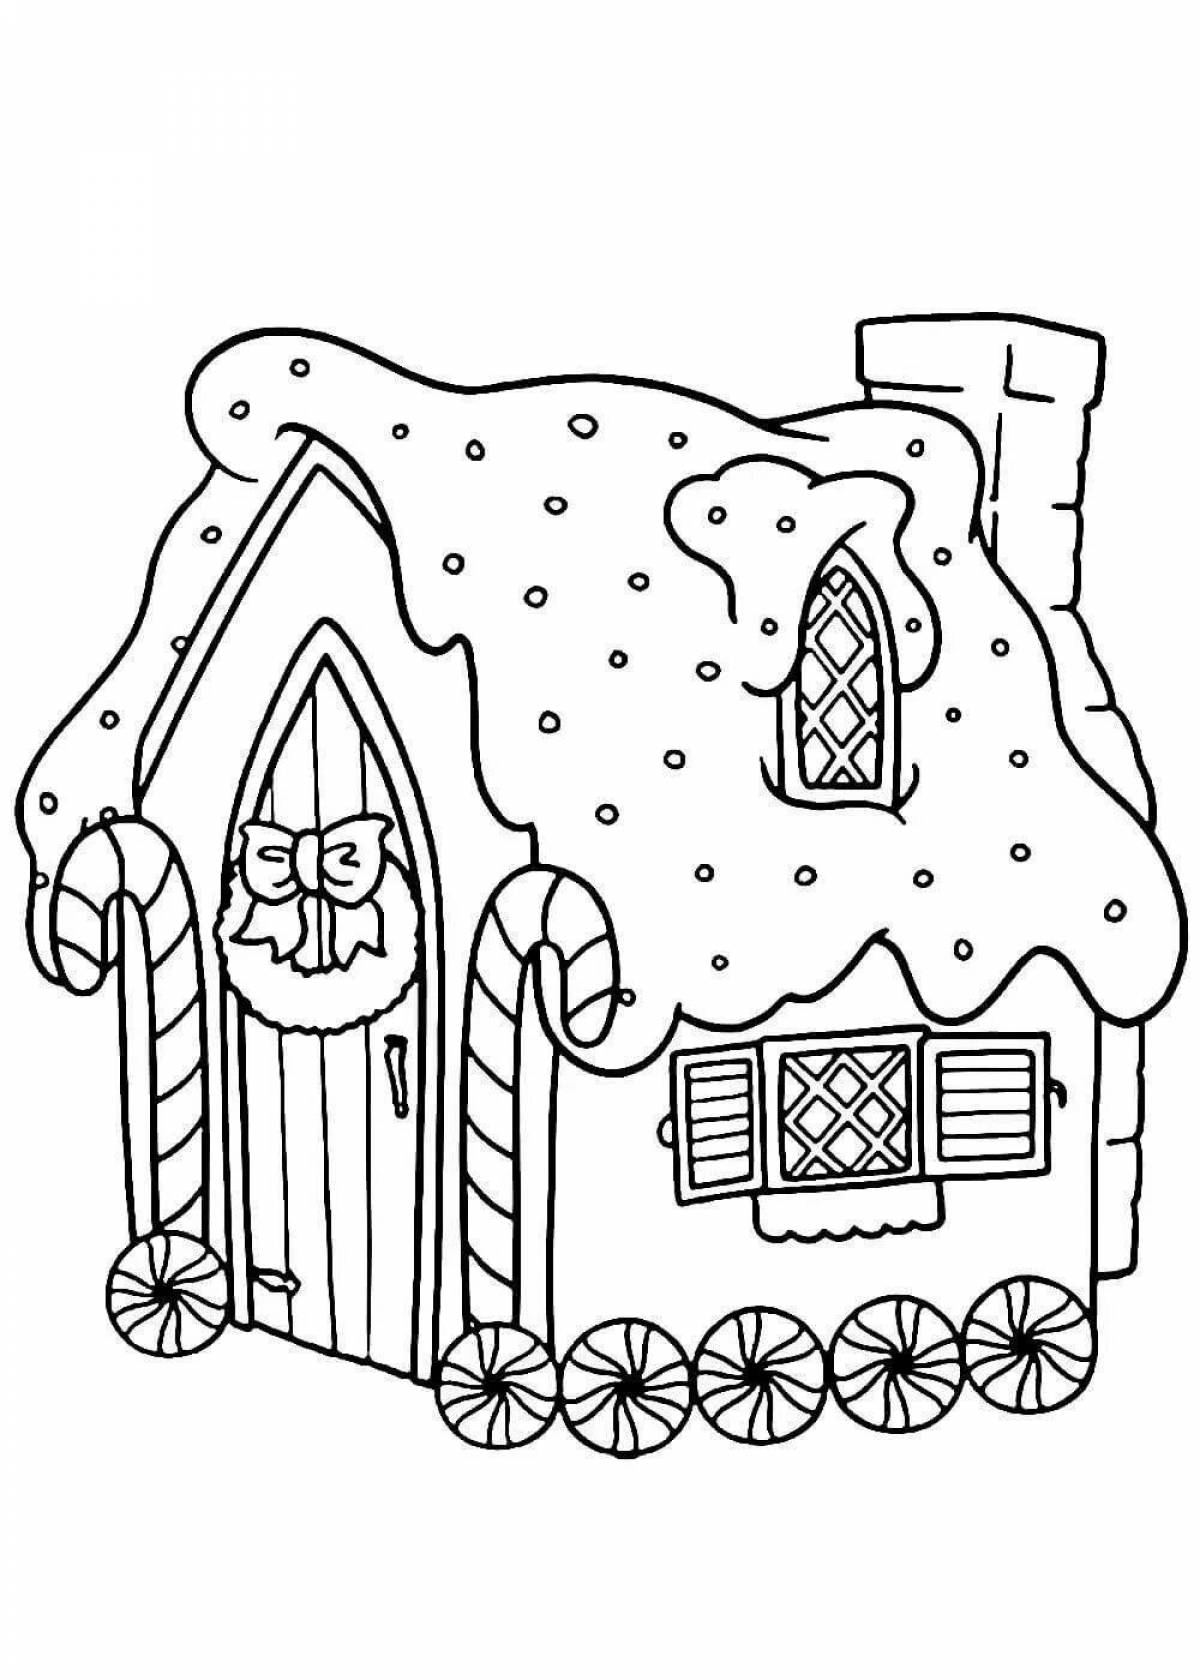 Wonderful fairy house coloring book